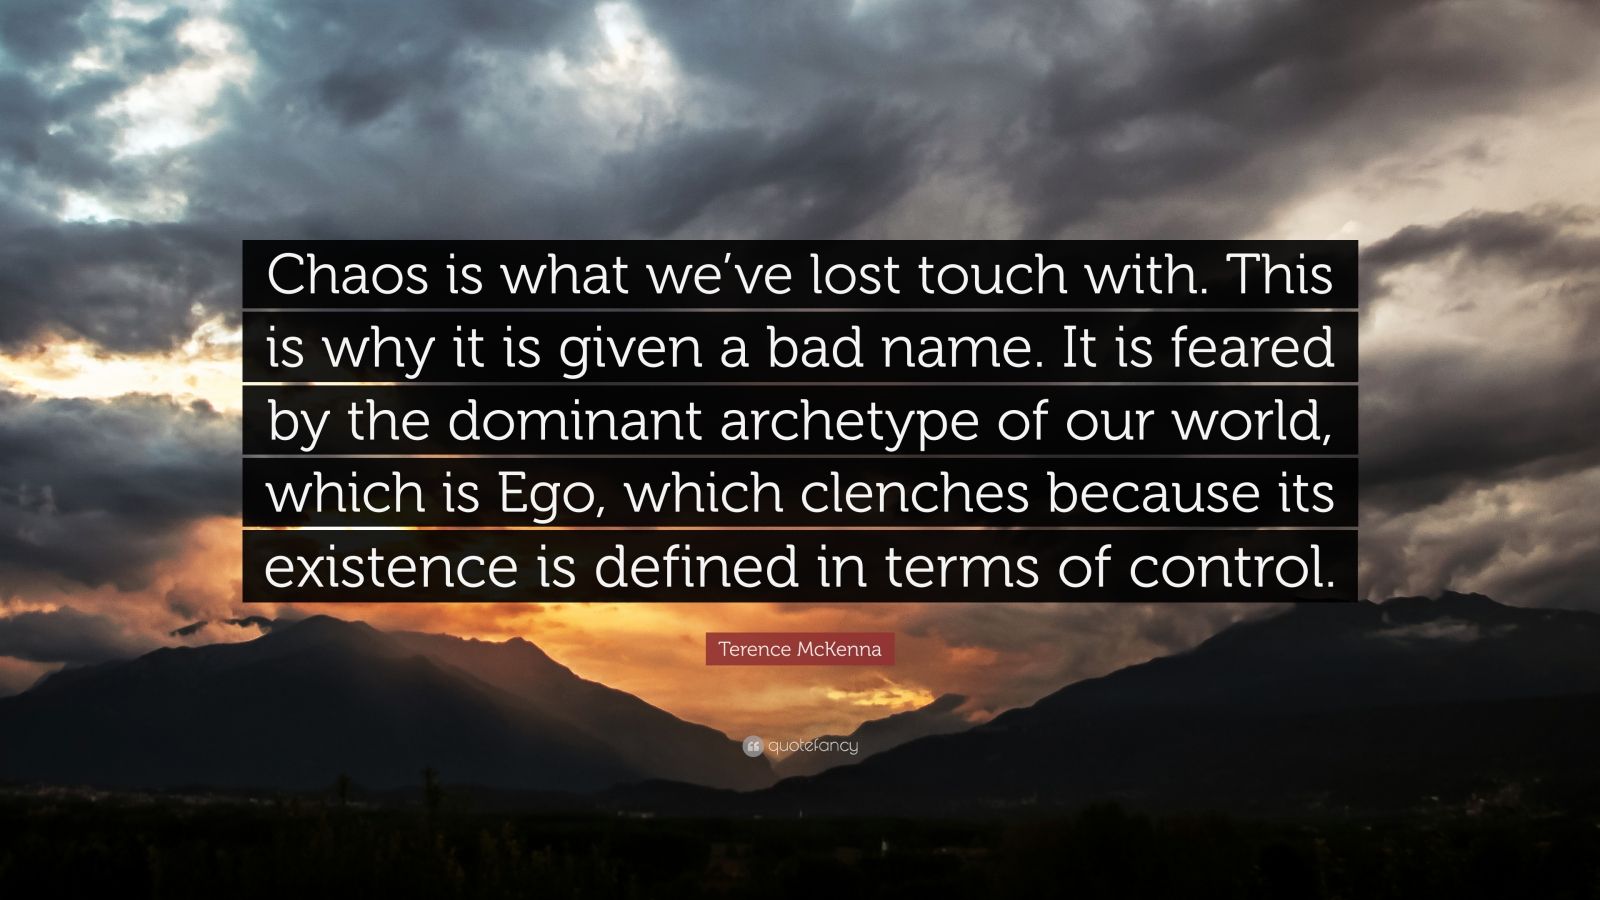 Terence McKenna Quote “Chaos is what we’ve lost touch